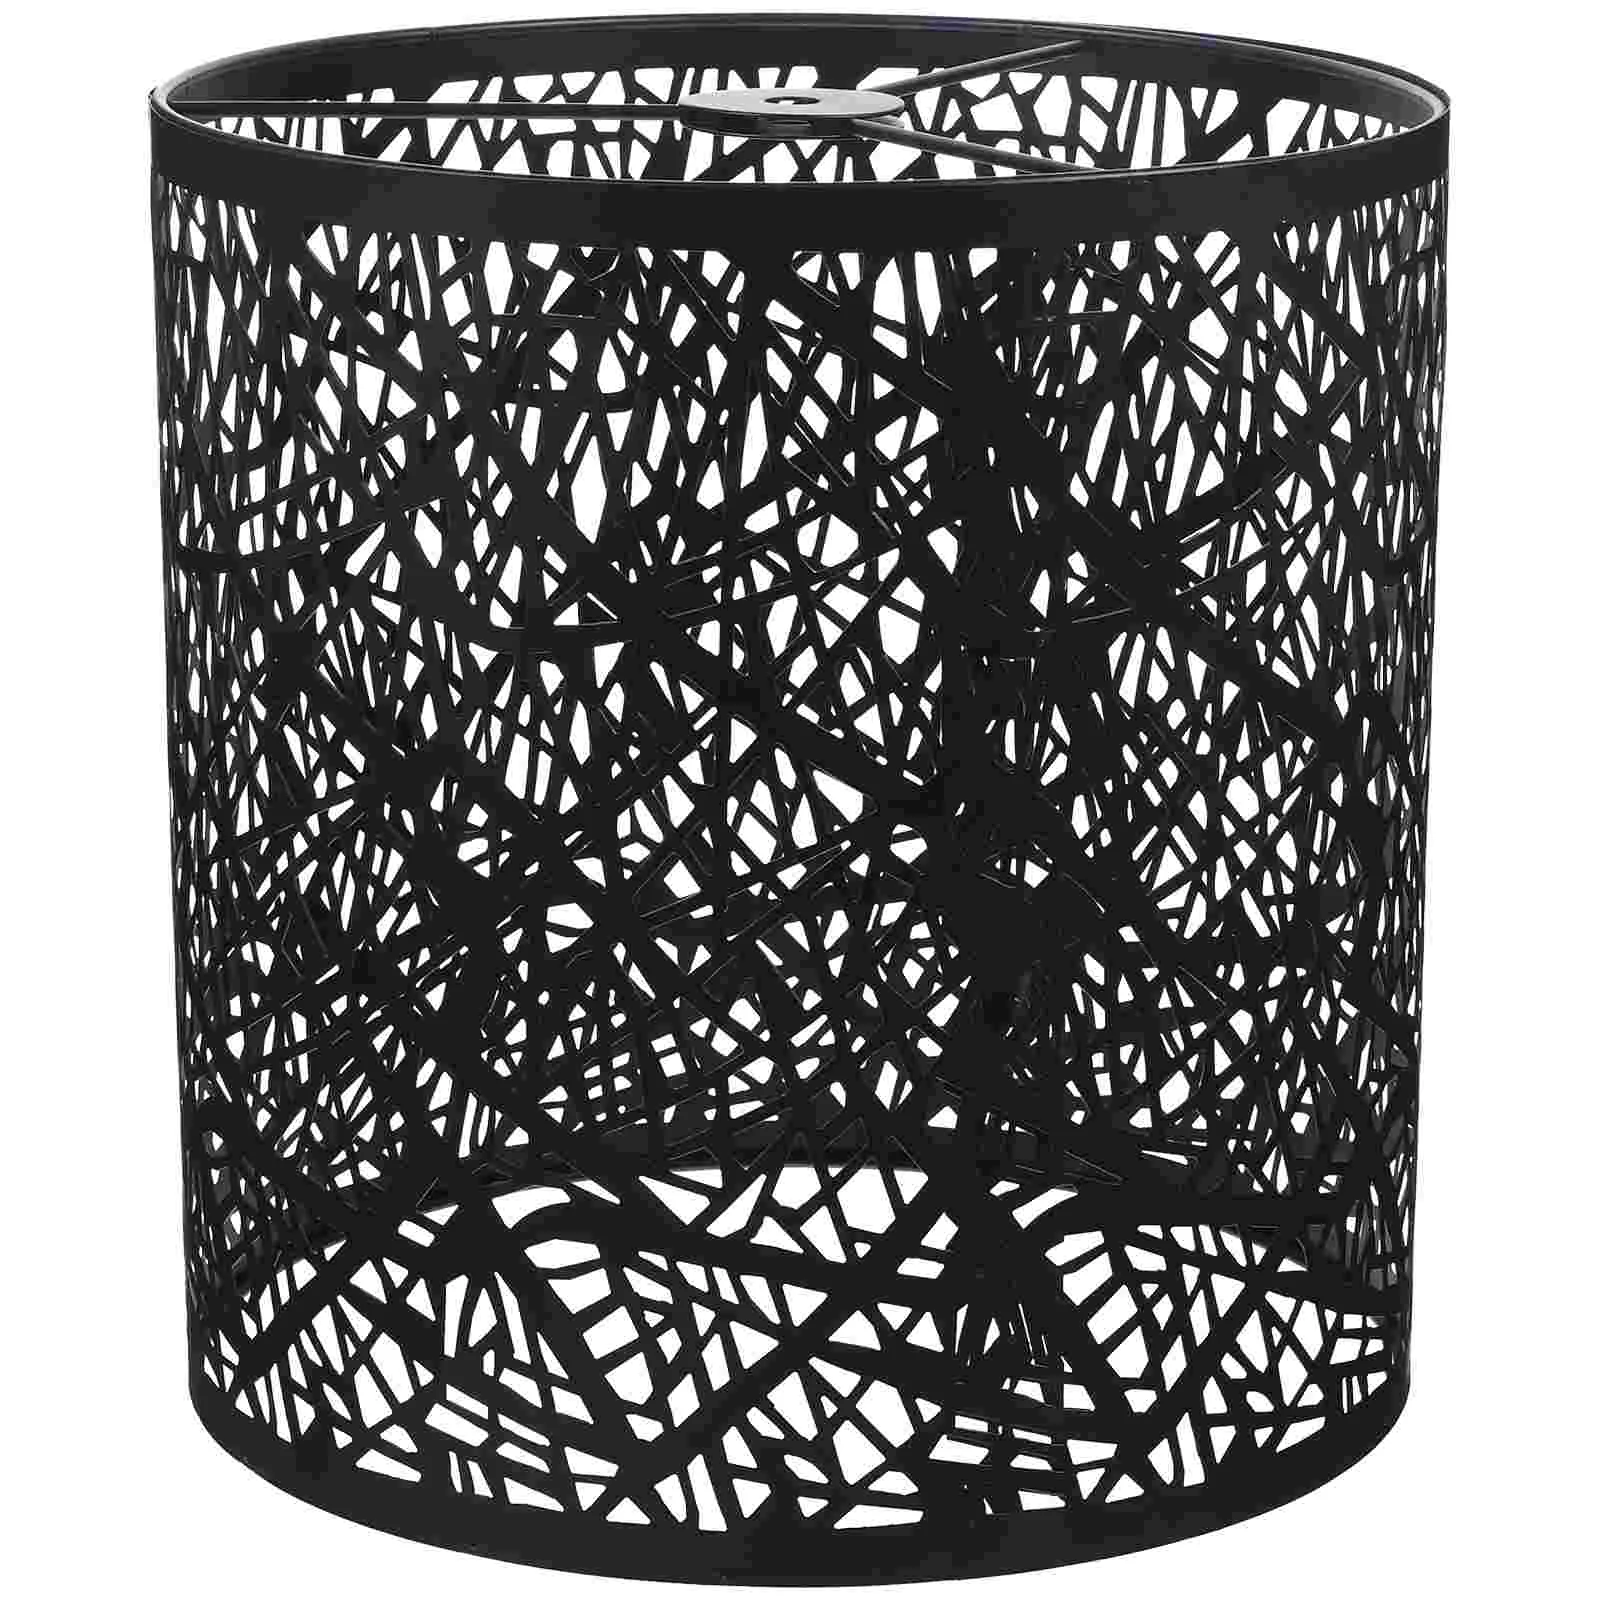 

Ceiling Wrought Iron Hollow Lampshade Wall Light Black Shades Decor Dome Pendant Bedside